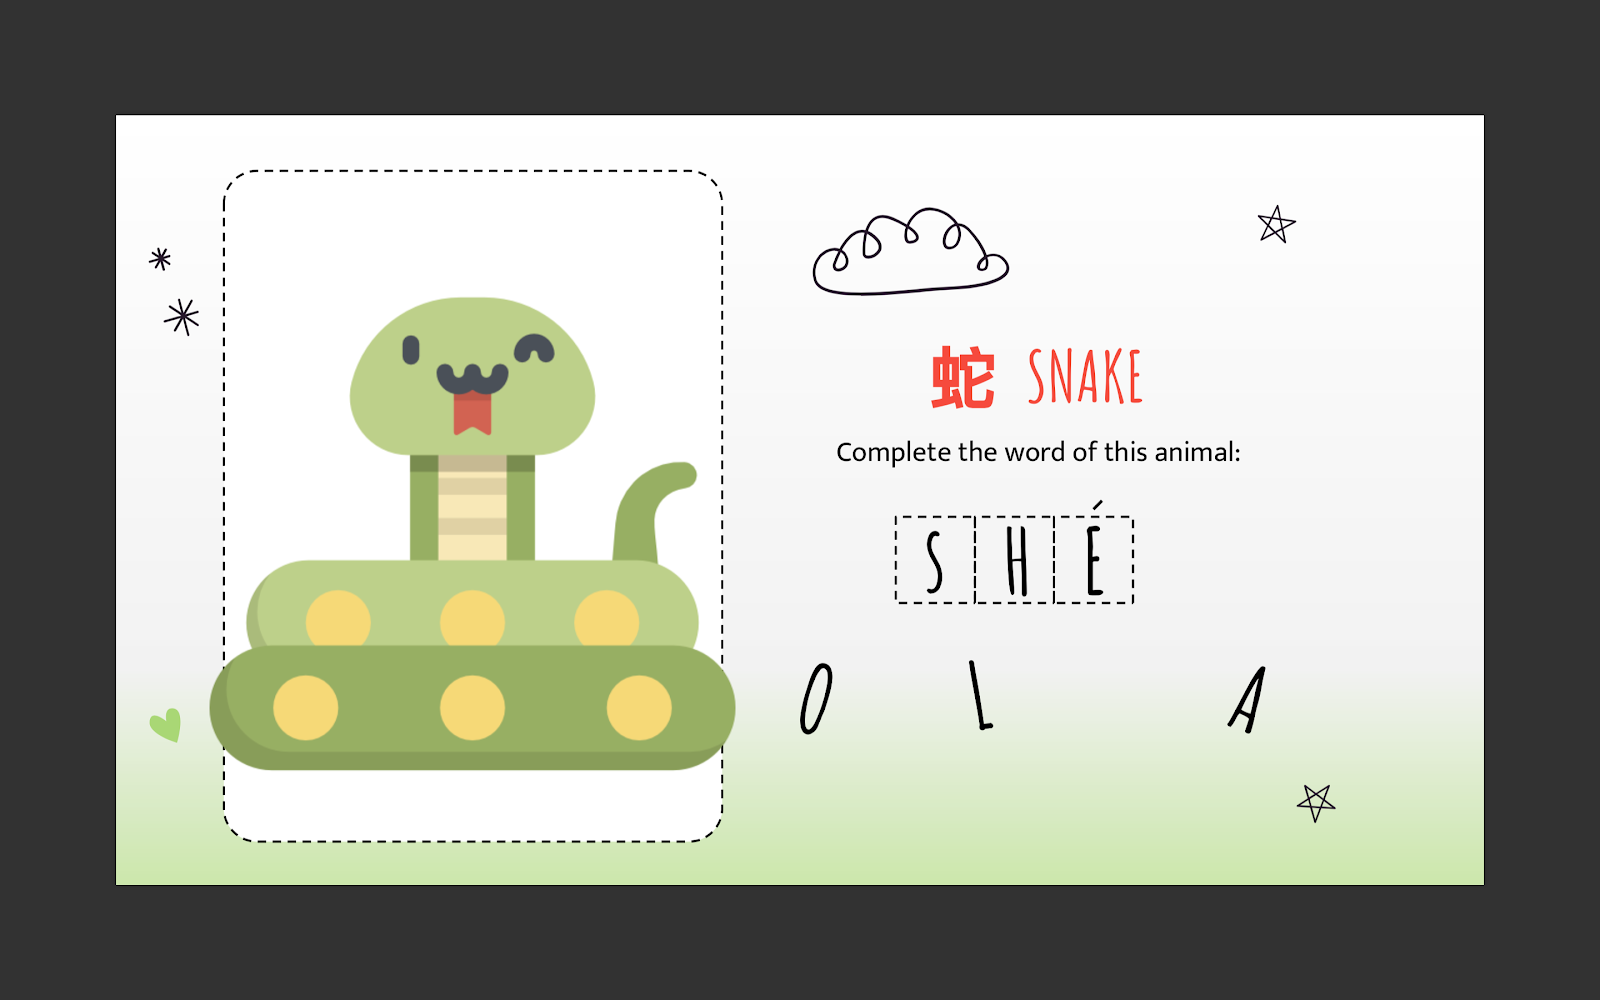 SNAKE 
Complete the word of this animal: 